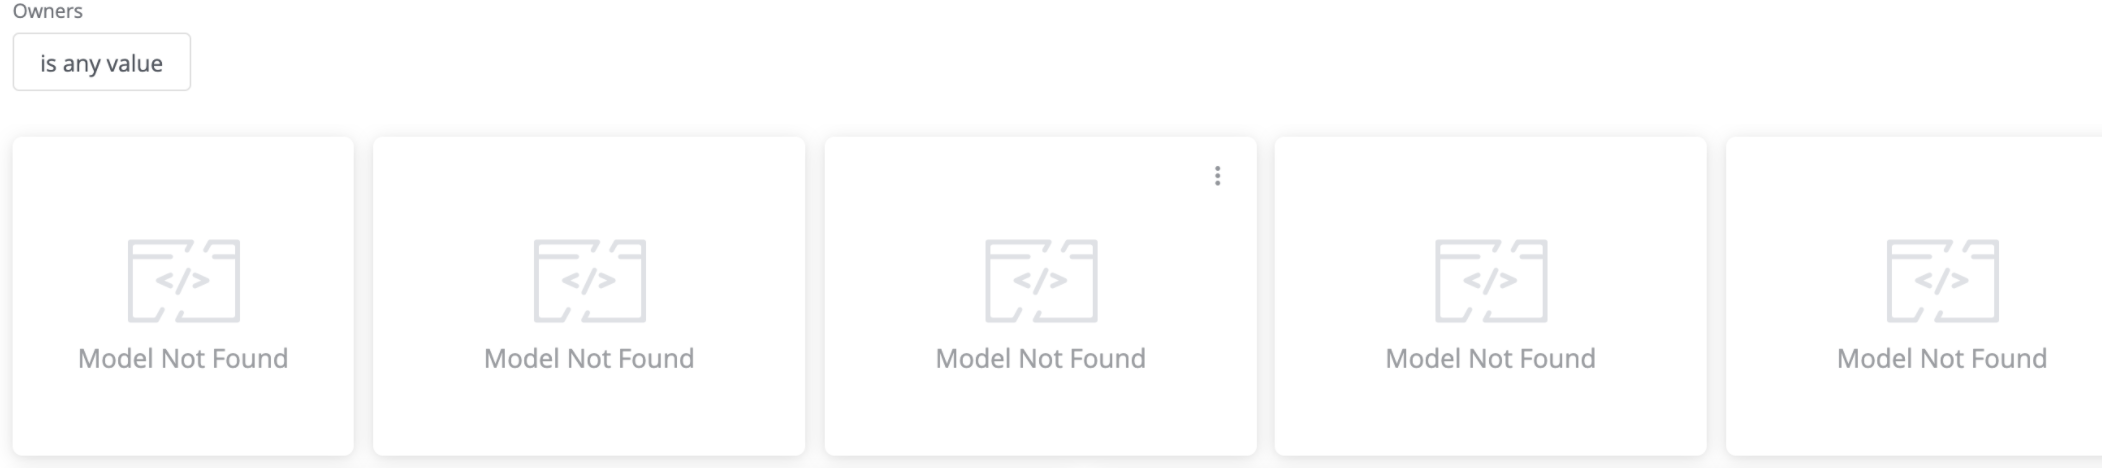 Model_not_found.png